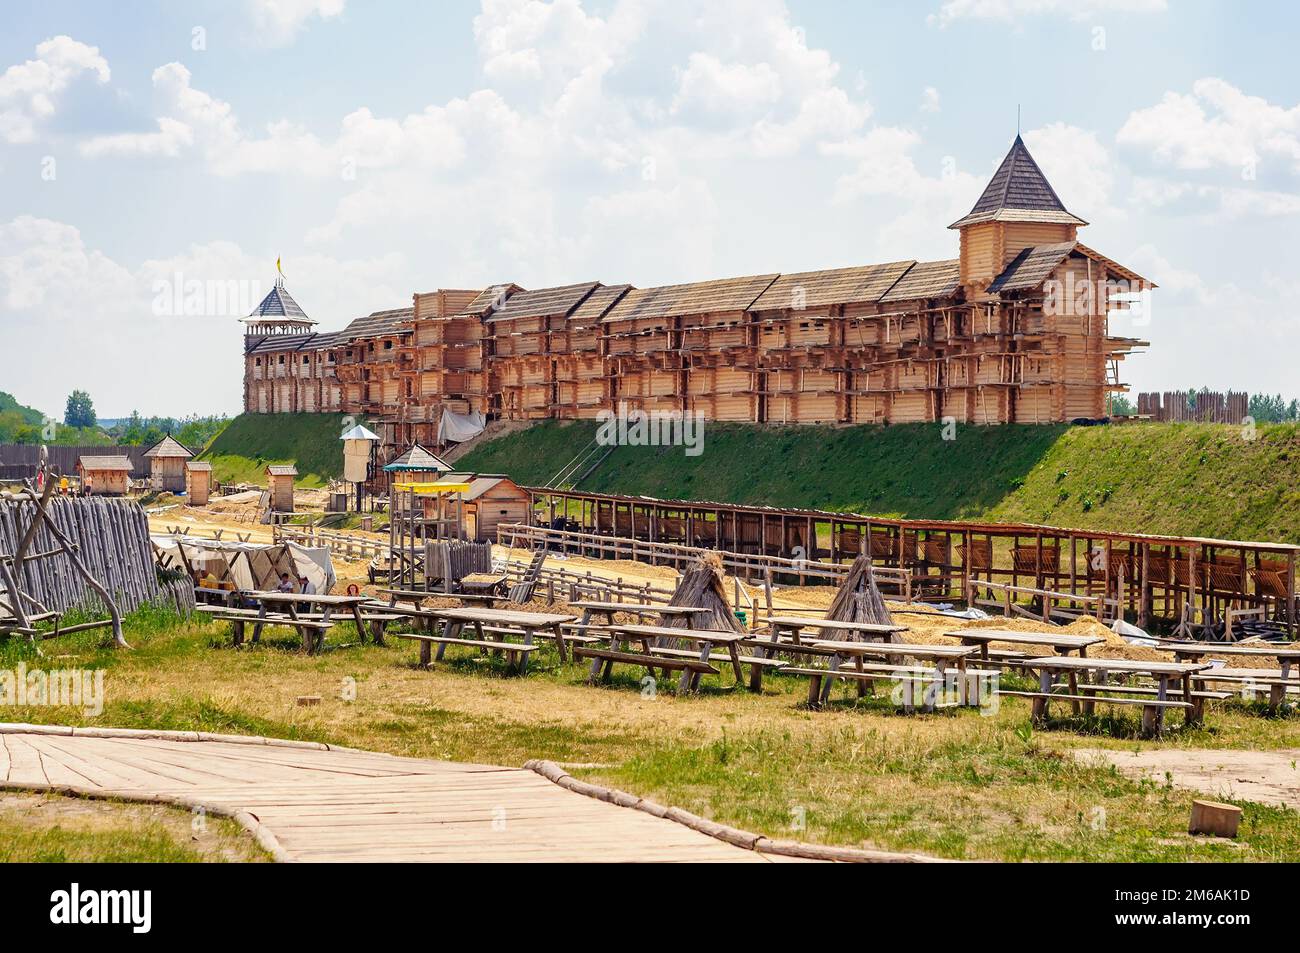 Park Kievan Rus, Kyiv region, Ukraine. July 06, 2013. Wooden fortifications with towers on the earthen rampart. Medieval reconstruction. Stock Photo